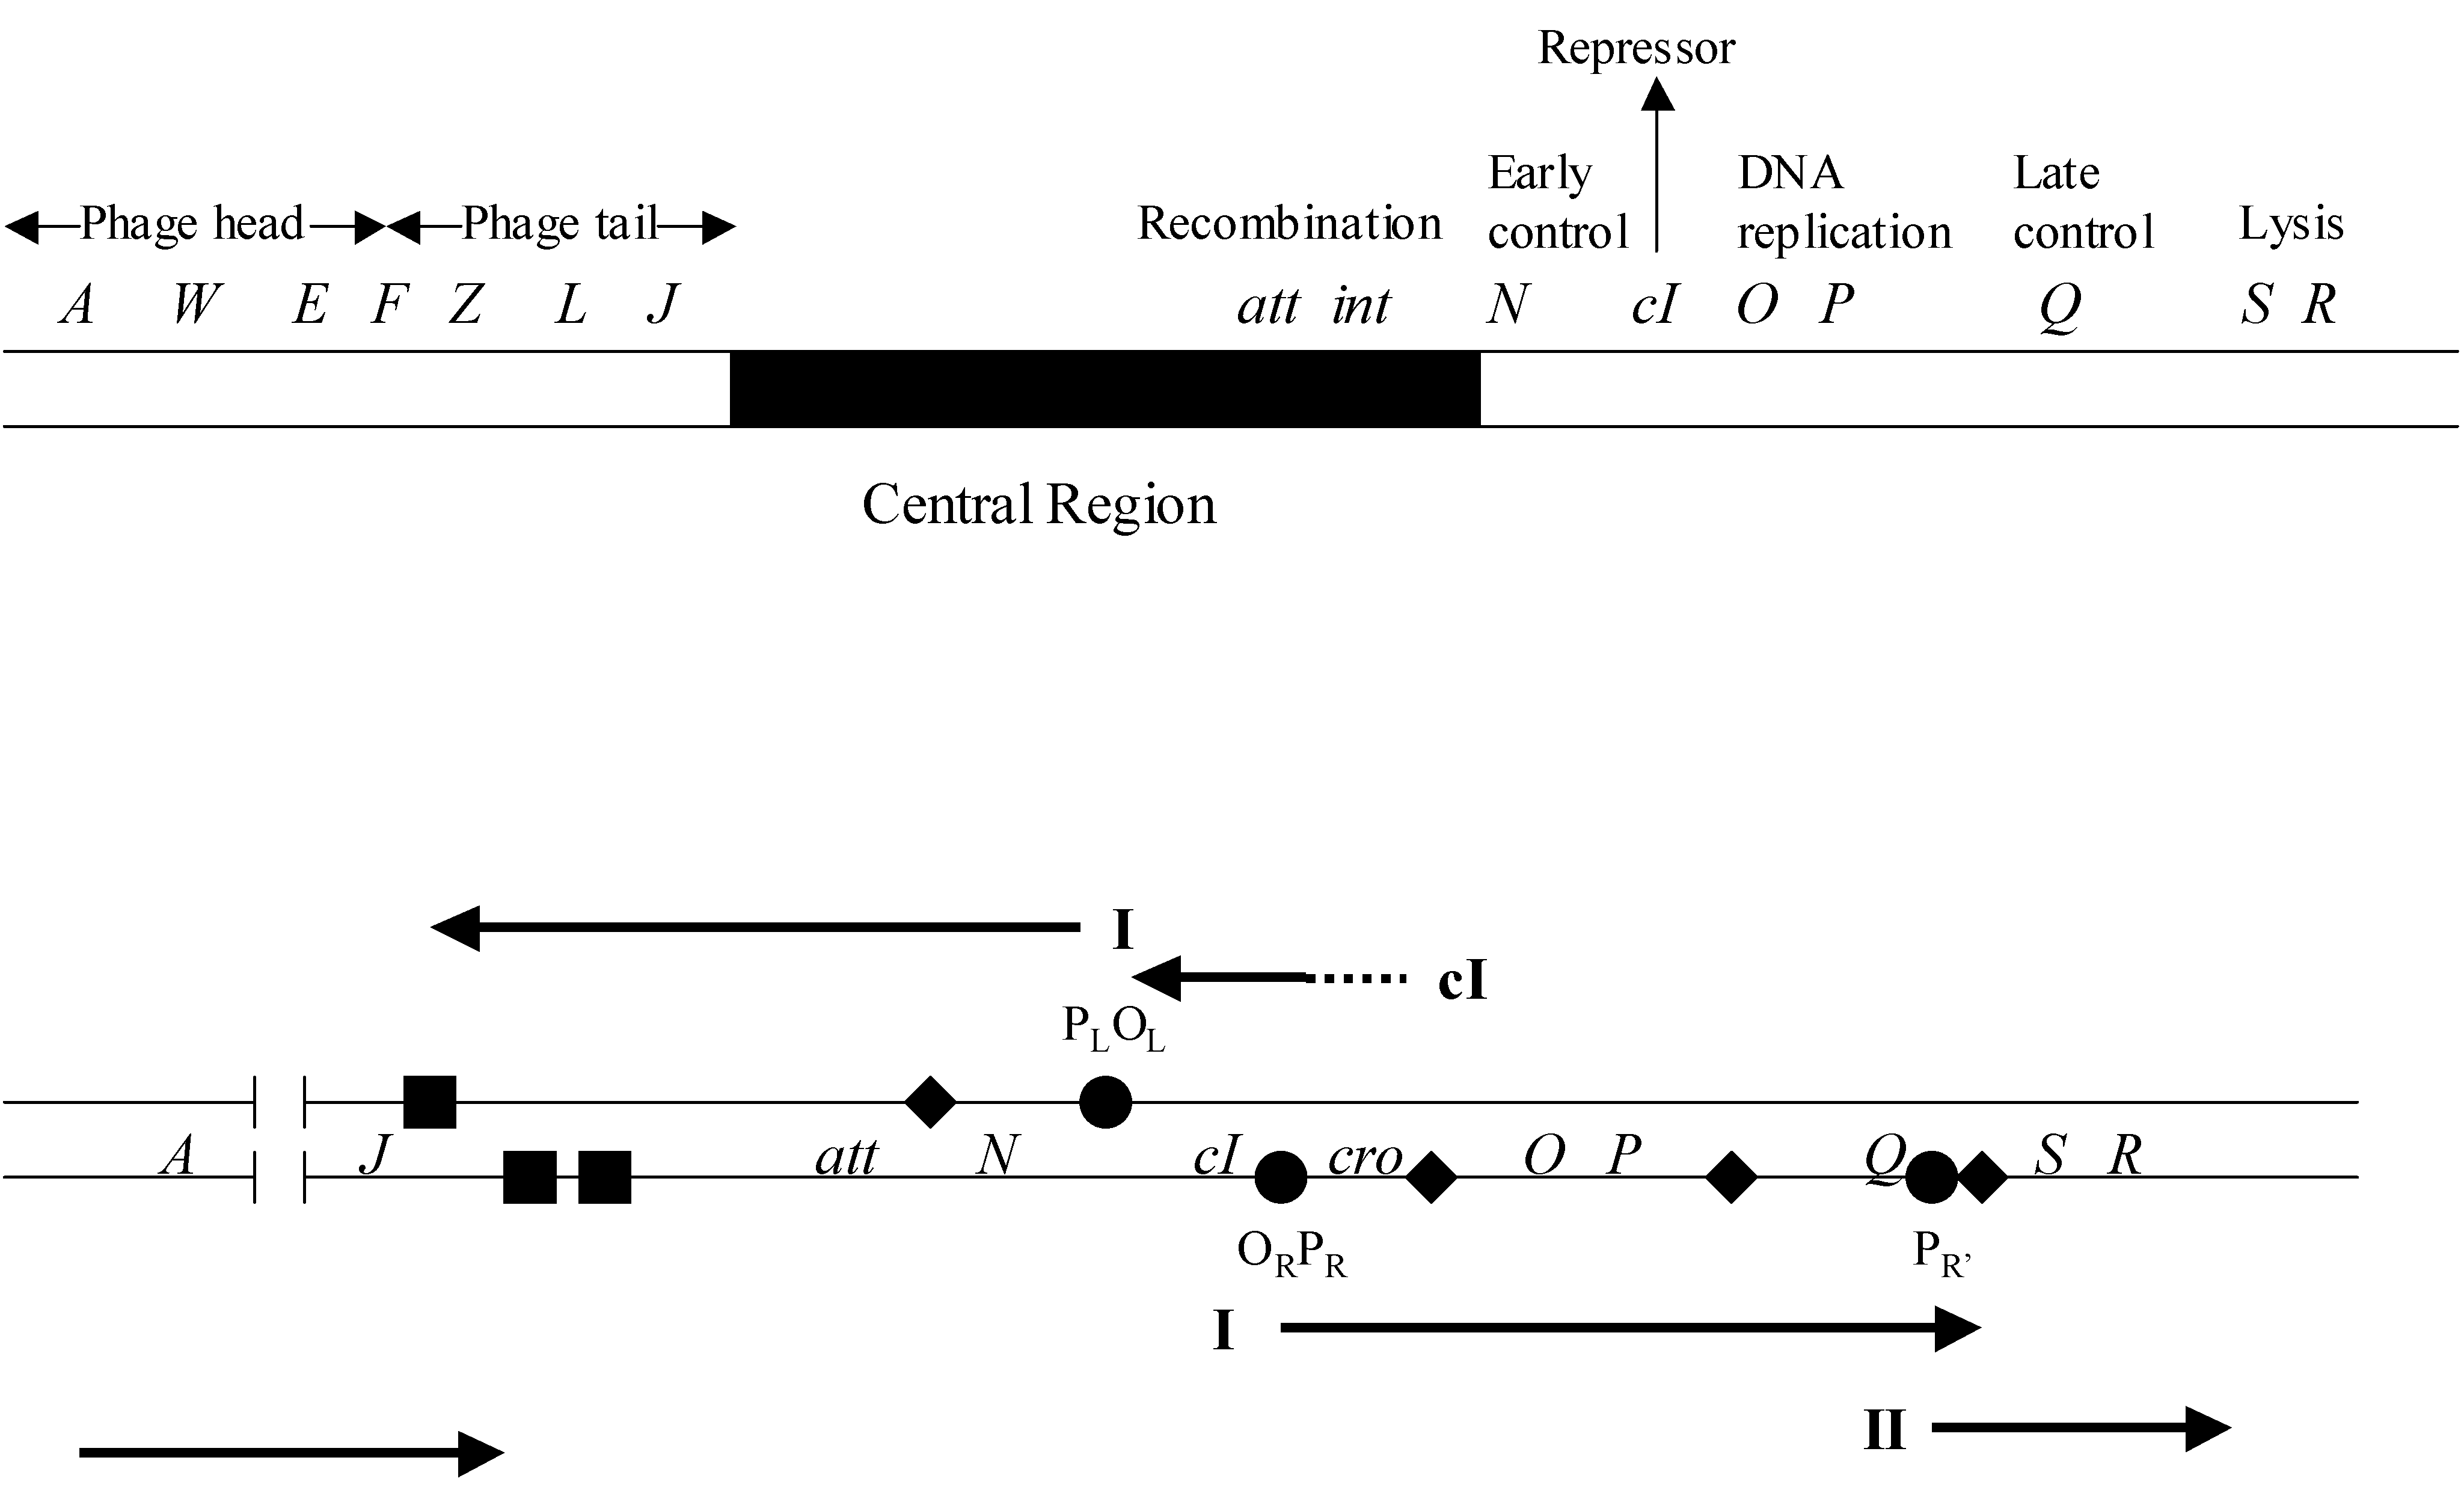 Figure 43-1: Phage lambda: its genome and transcription circuits. Upper. The phage DNA enters the bacterium as a linear molecule but circularizes via its cohesive ends. Genes that encode related functions are clustered in the lambda genome. Genes within the “central region”, identified by the solid segment, are inessential for propagation of the phage. att, located within the central region identifies the site at which site-specific recombination integrates the phage genome into the bacterial chromosome. The map is not drawn to scale. Lower. Transcription of the genome proceeds initially from two promoters, pL and pR. At the earliest stage of infection, transcripts initiated at p(L) and p(R) (I) terminate at specific signals, upsilon, (some rightward transcripts initiated at p(R) reach the second termination signal). Only in the presence of the N gene product does most transcription proceed beyond the termination signals into the downstream genes. The consequent synthesis of Q protein allows transcription of the late genes (II) to proceed from p(R)? through the adjacent termination signal into the lysis genes and the genes that specify the components of the phage head and tail. Transcription of the repressor gene (cI) during the establishment of lysogency is initiated at a promoter pRE situated to the right of cro. Repressor synthesis is maintained by autogenously controlled transcription from pRM, a promoter that overlaps O(R).Closed circles, major promoters, upsilon major termination signals susceptible to N- and/or Q-dependent antitermination; Closed squares, major termination signals that block transcription of N- and/or Q-modified RNA polymerase.